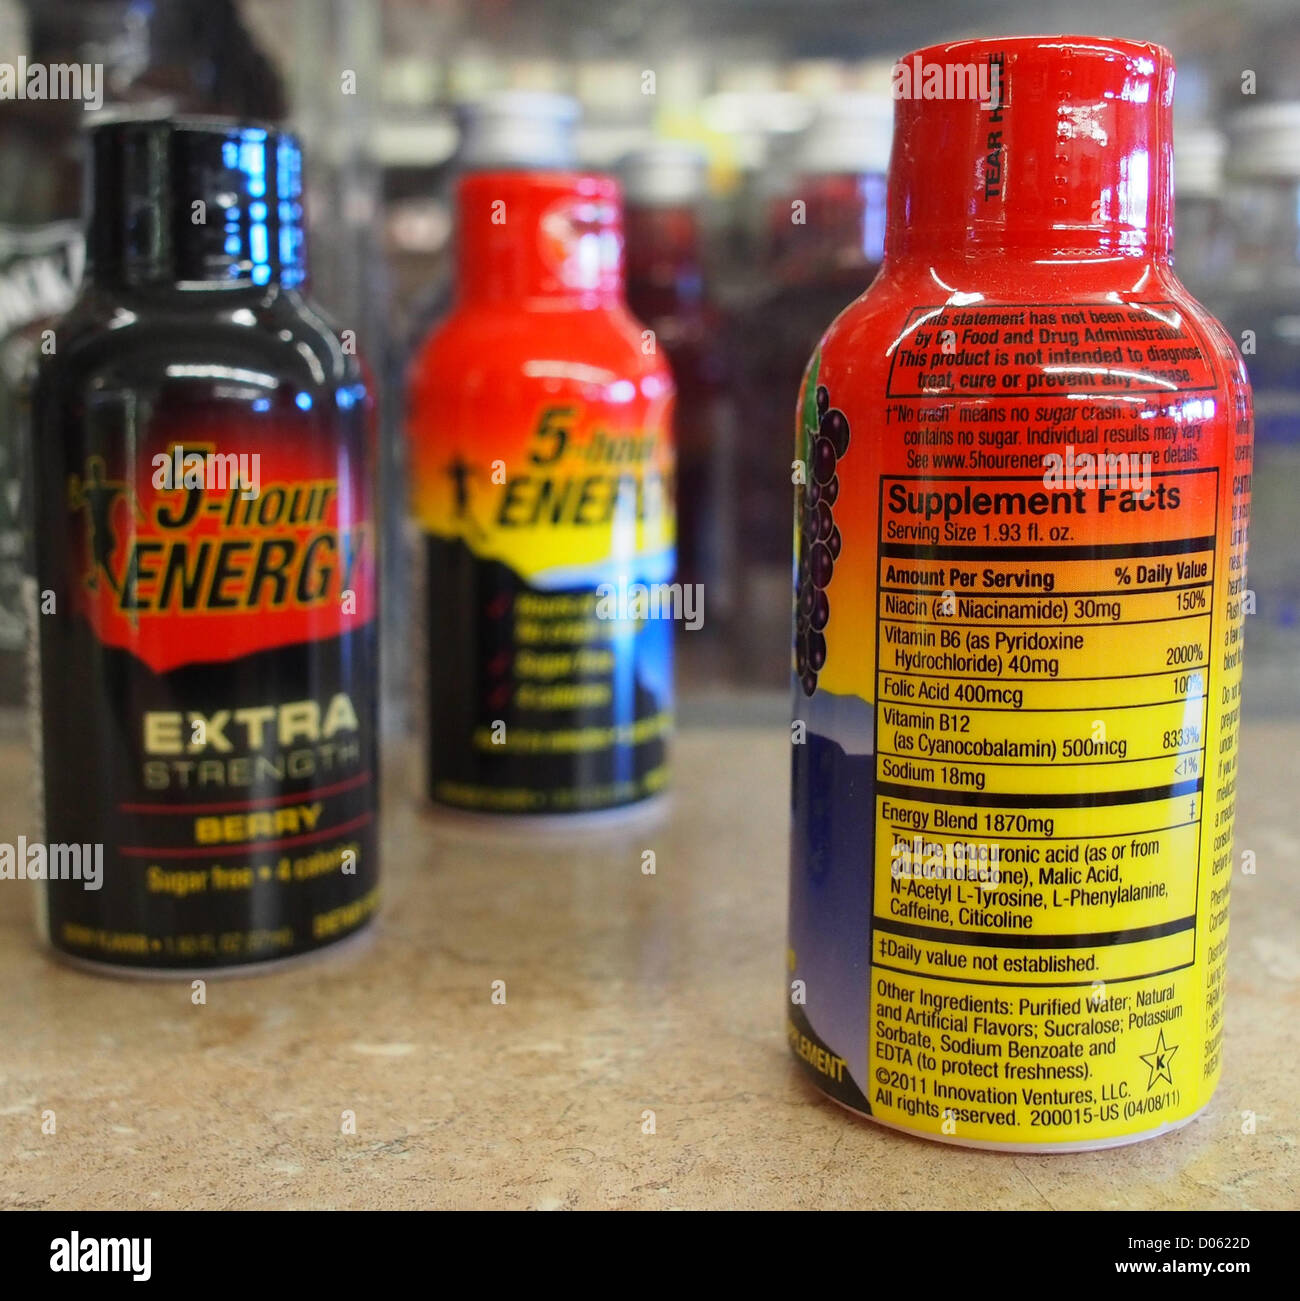 Jan. 1, 2012 - Orange County, California, USA - The supplemental label on the back of a 1.93 ounce 5-Hour Energy Drink.  5-Hour Energy drinks come in several flavors including orange, cherry and grape as well as a berry flavor in an extra strength mix.  News outlets, including ABC's Nightline, have reported that 13 deaths along with over 30 hospitalizations over the last 4 years in the United States can be attributed to the use of highly caffeinated energy drinks like 5-Hour Energy and Monster.  The drinks carry no age restriction and can be purchased by children.  In the case of 5-Hour Energy Stock Photo